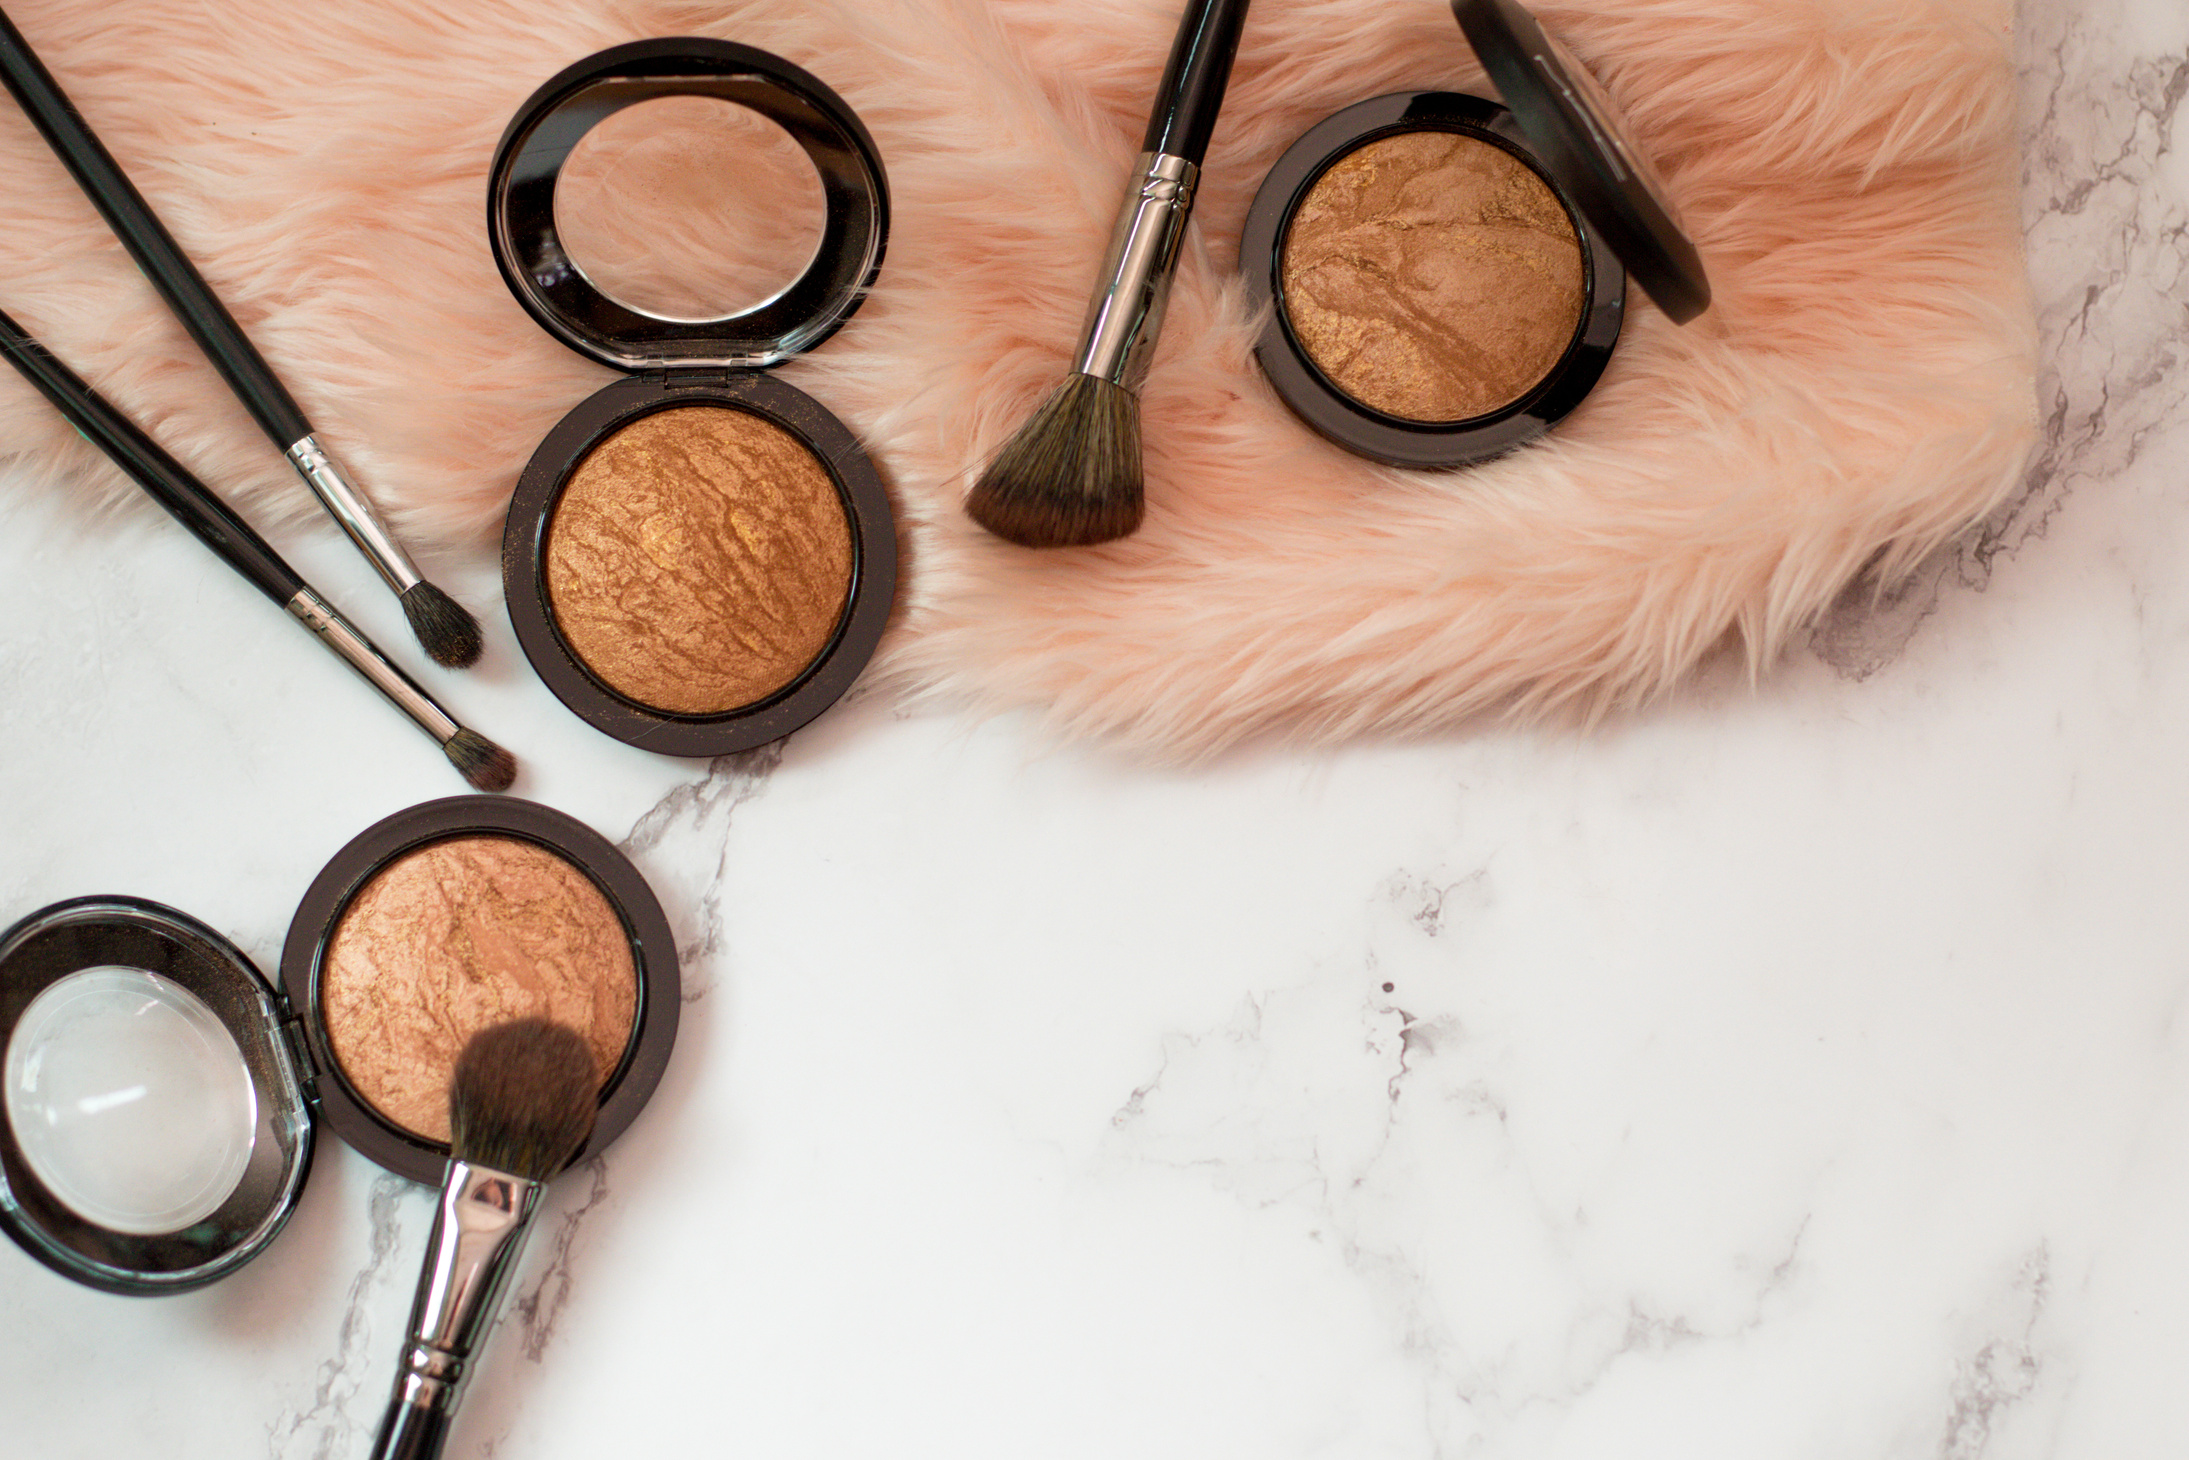 Blushes and Brushes with Fur Carpet Flatlay